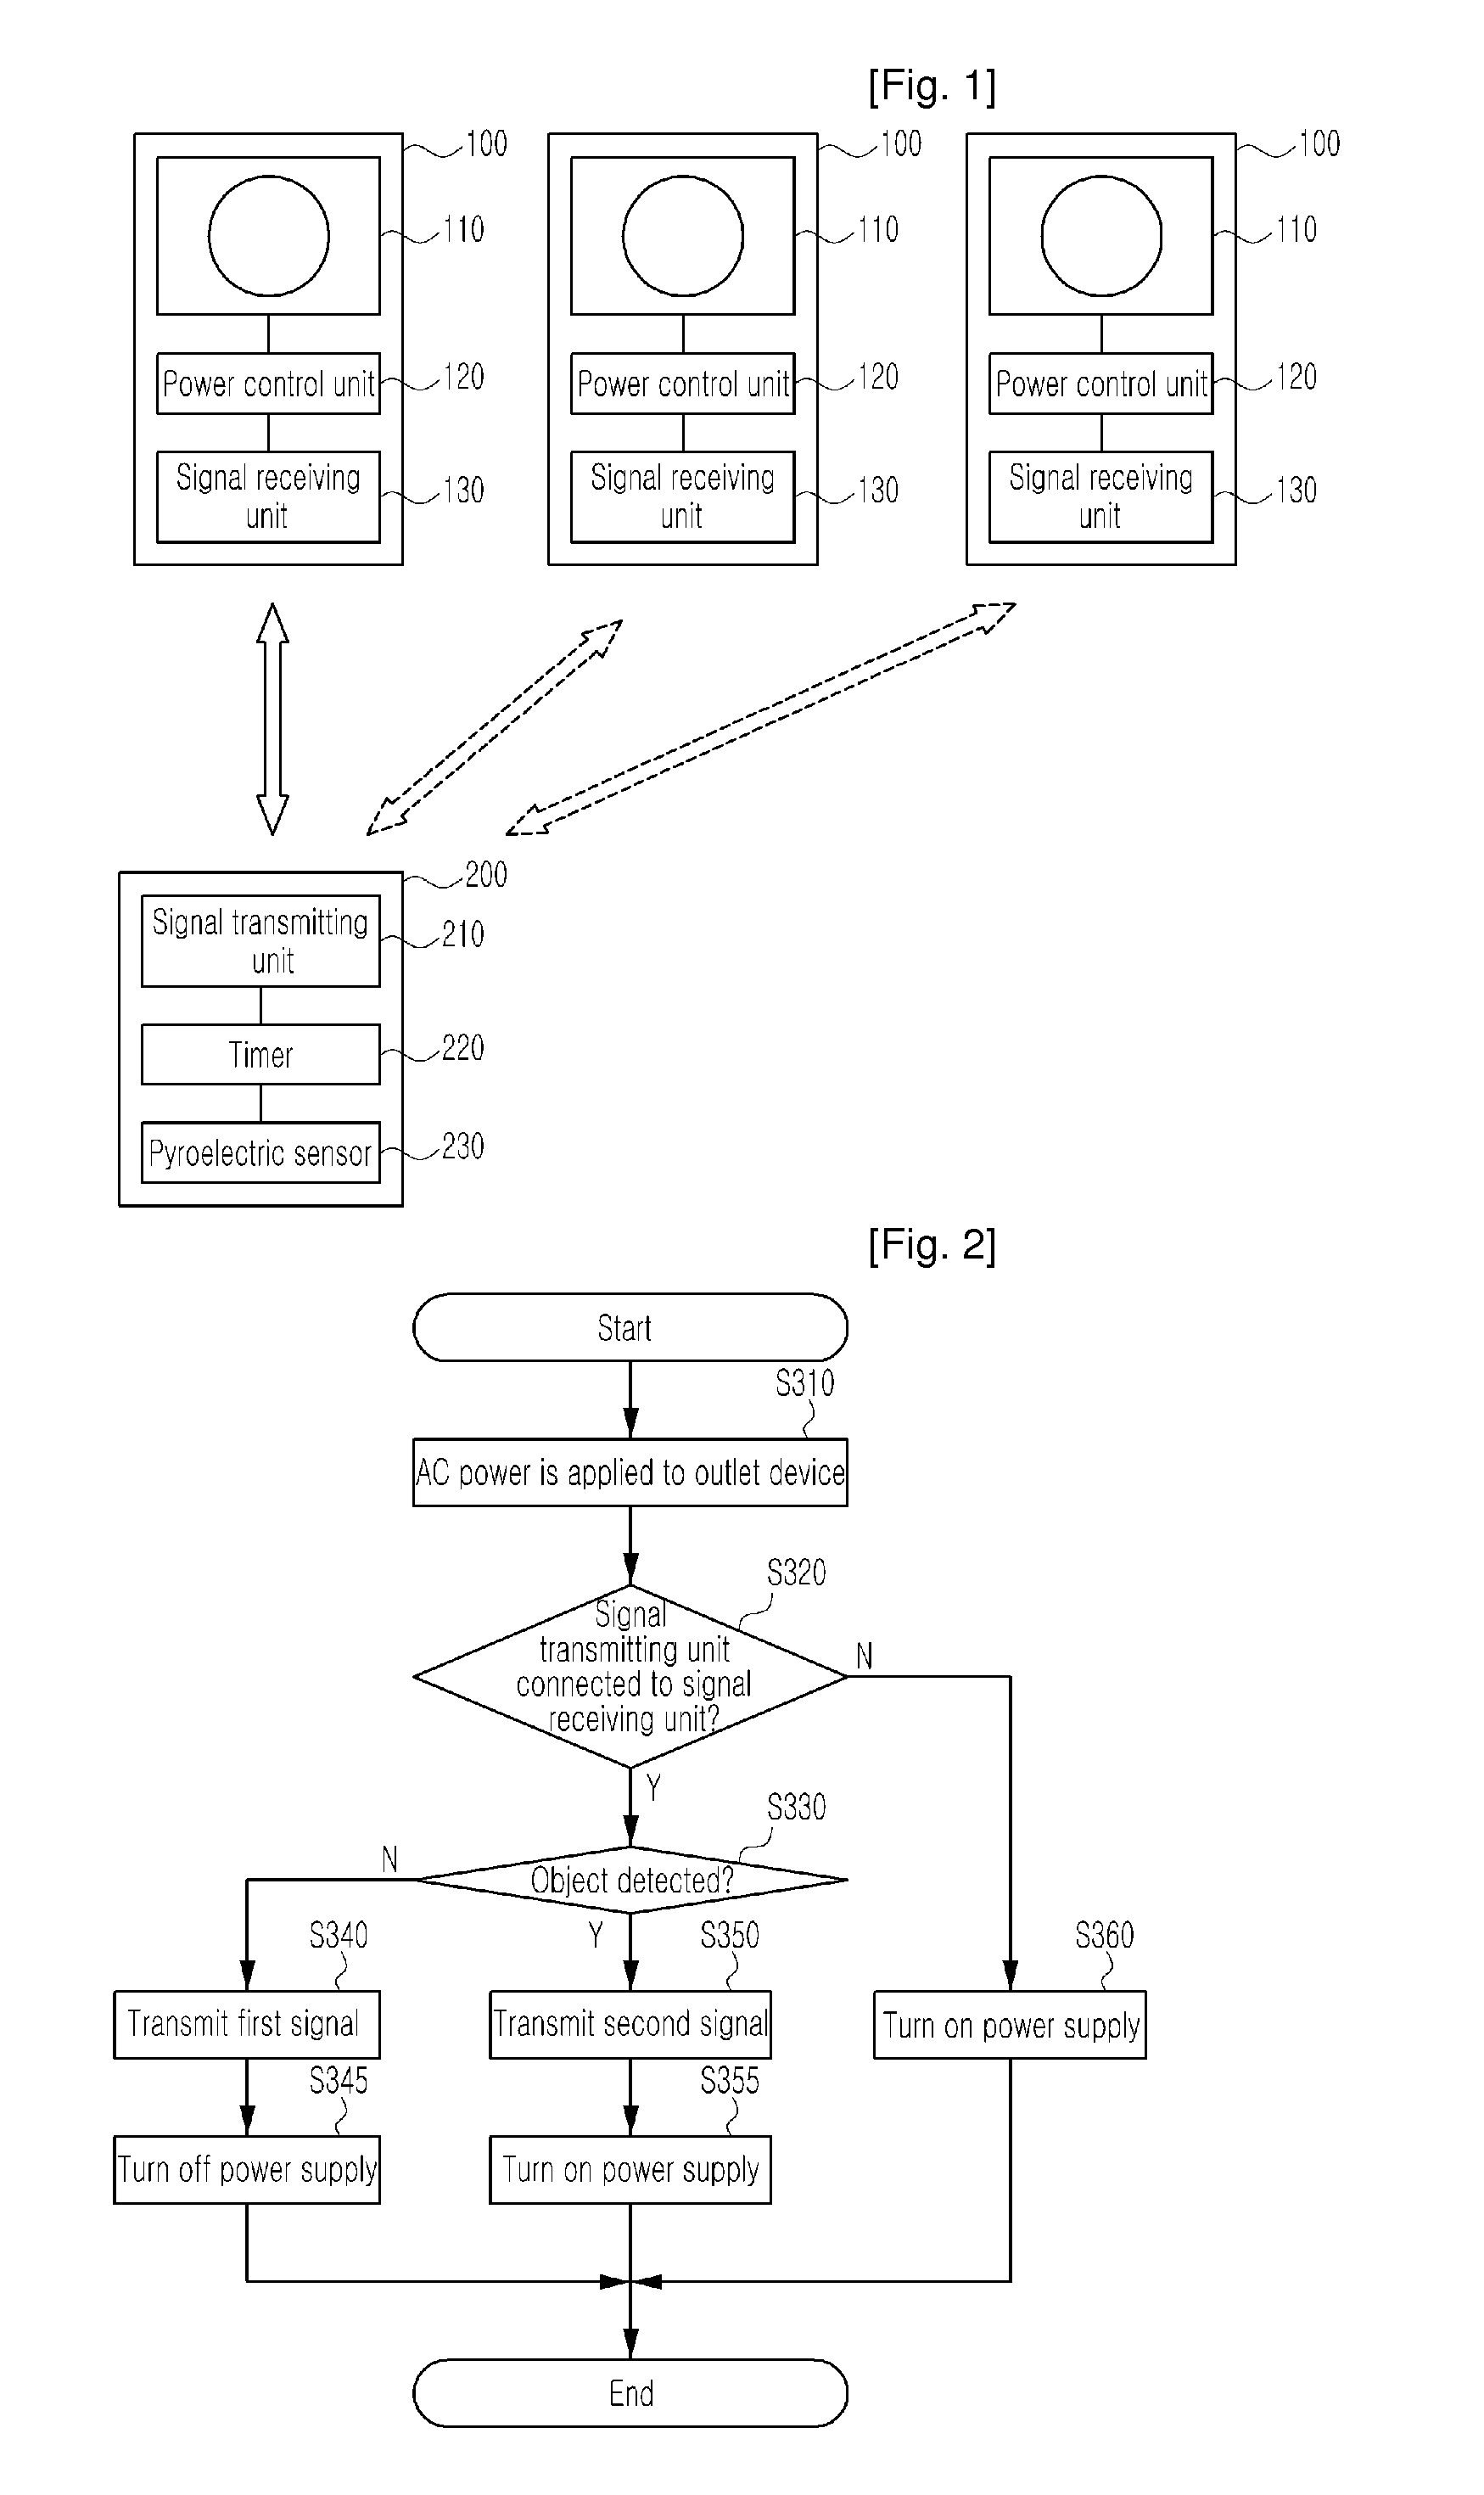 System controlling electric power and system controlling valve